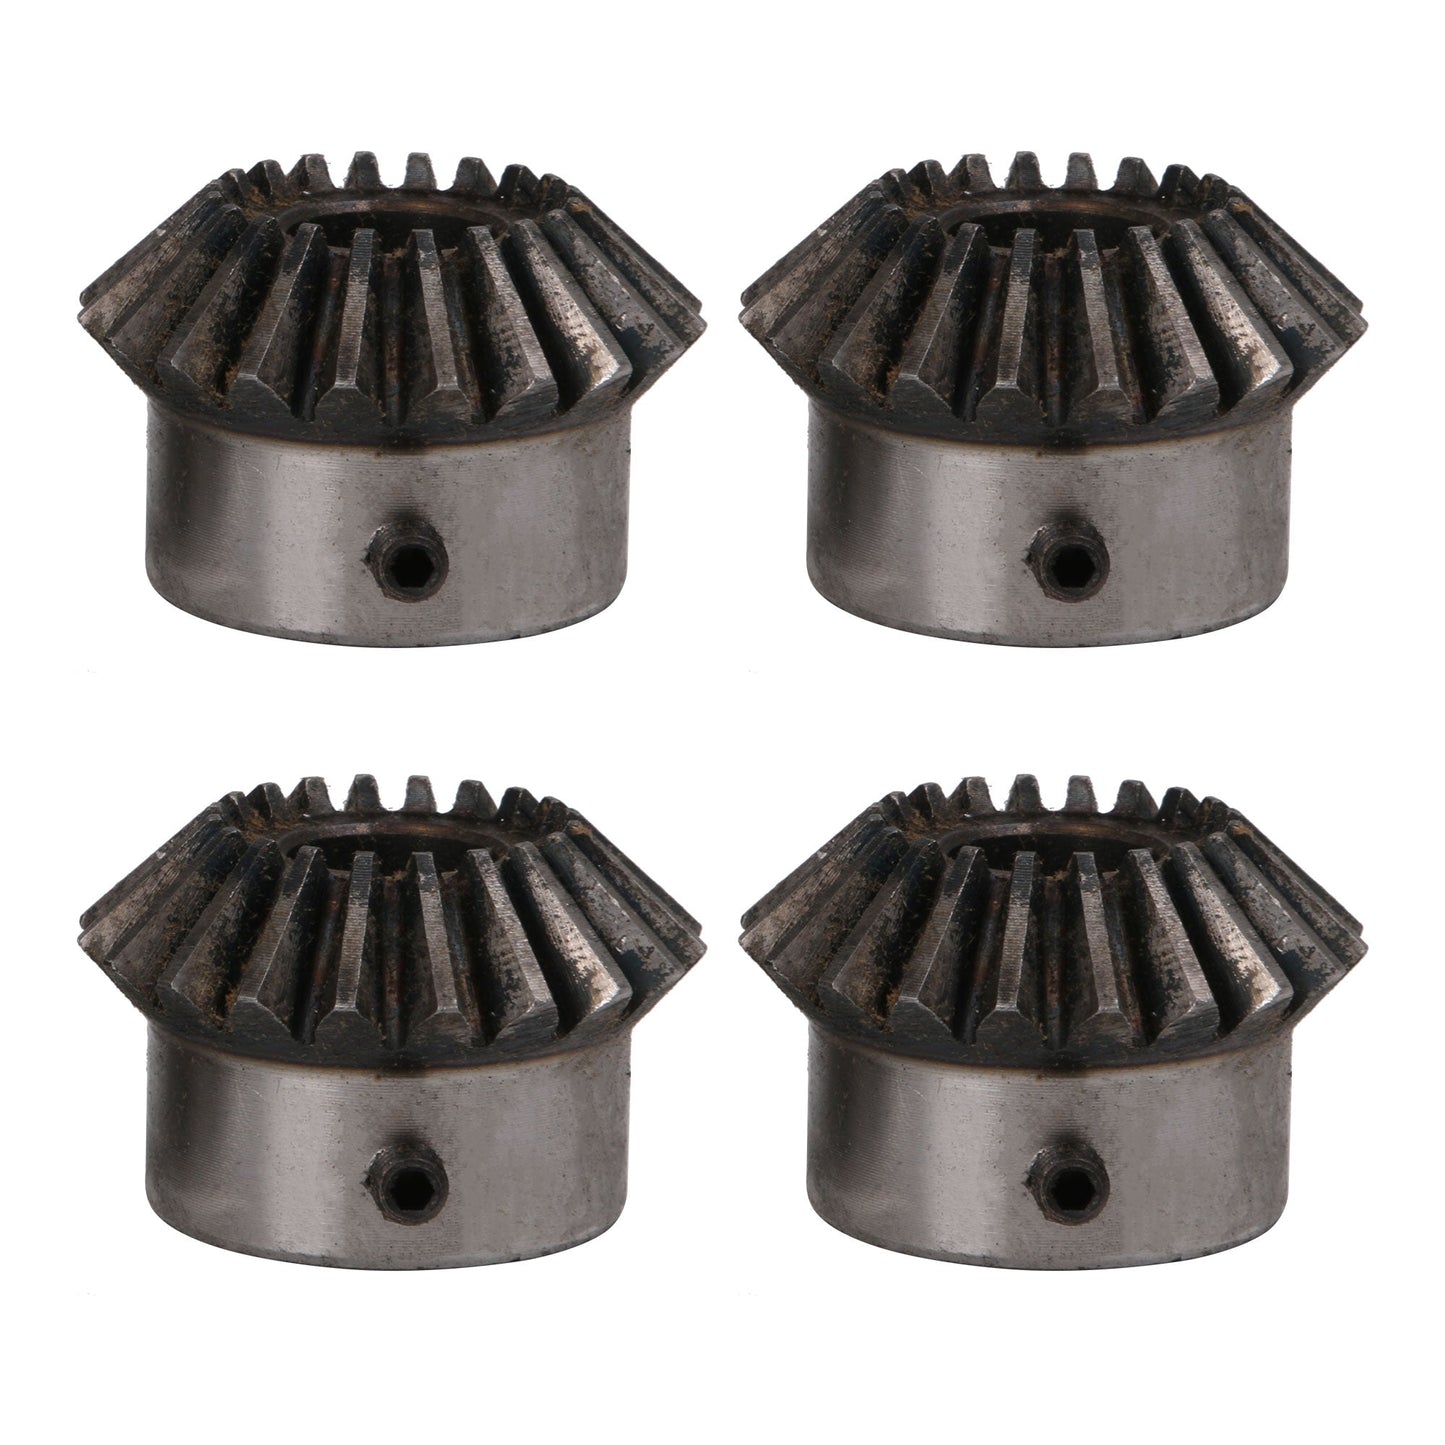 BQLZR Metal Bevel Driver Gear Wheel 2 Modulus 20 T 0.55Inch Hole Dia for DIY Pack of 4